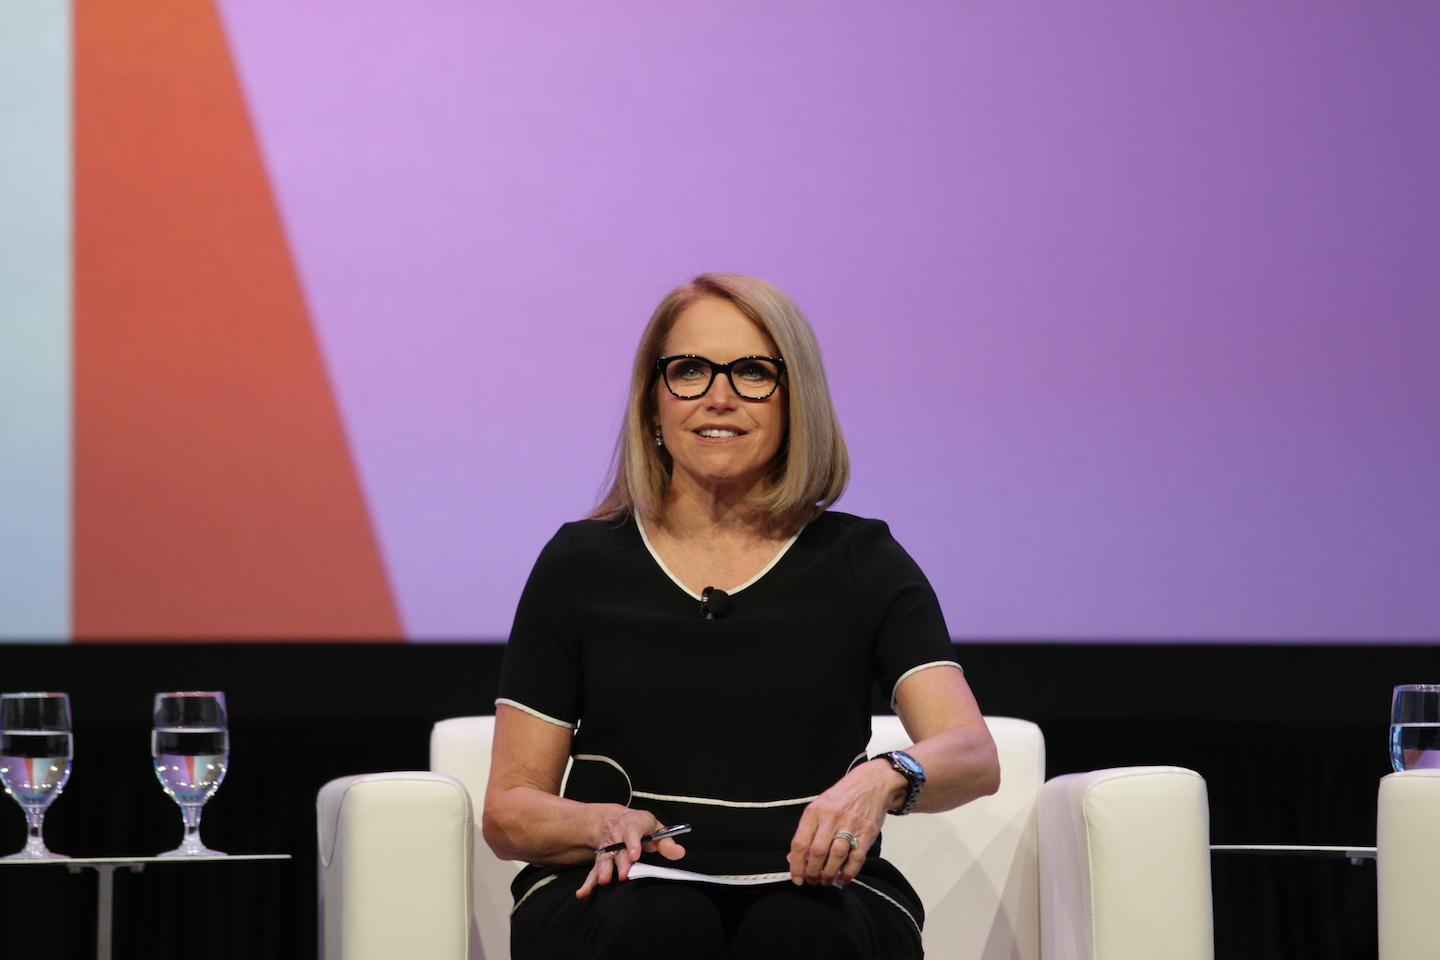 Katie Couric recorded a live podcast in Ballroom D. Photo by Carly Hughes